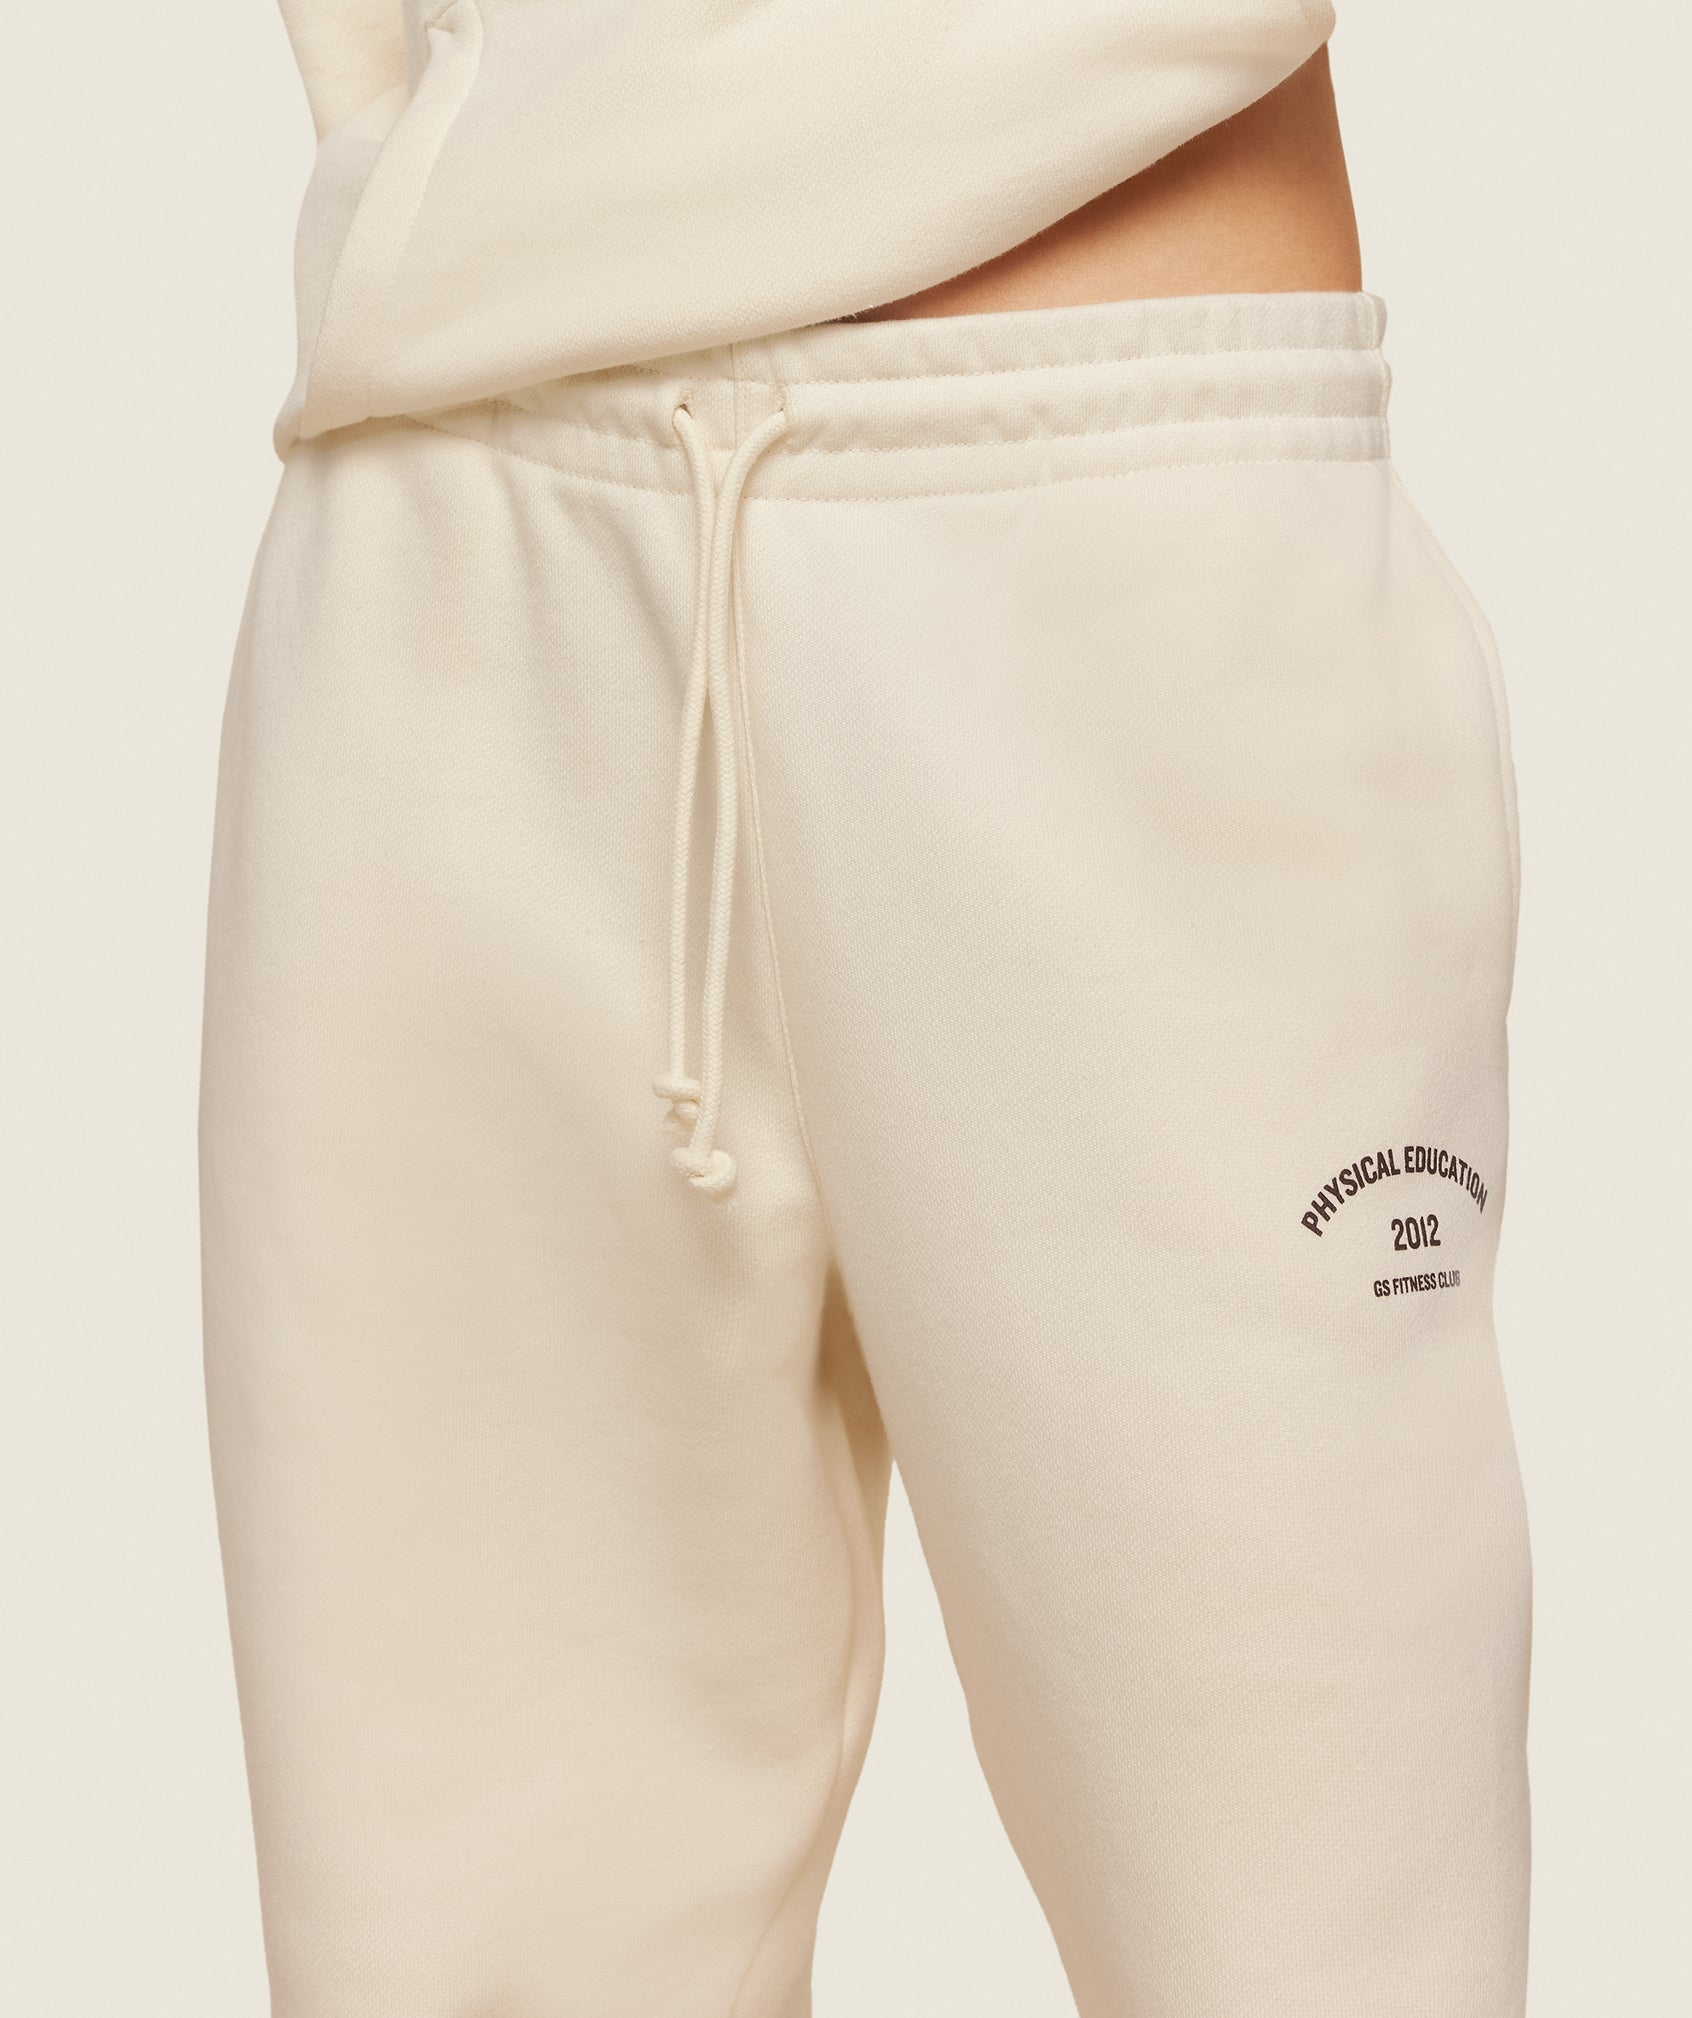 Phys Ed Graphic Sweatpants in Ecru White/Archive Brown - view 3